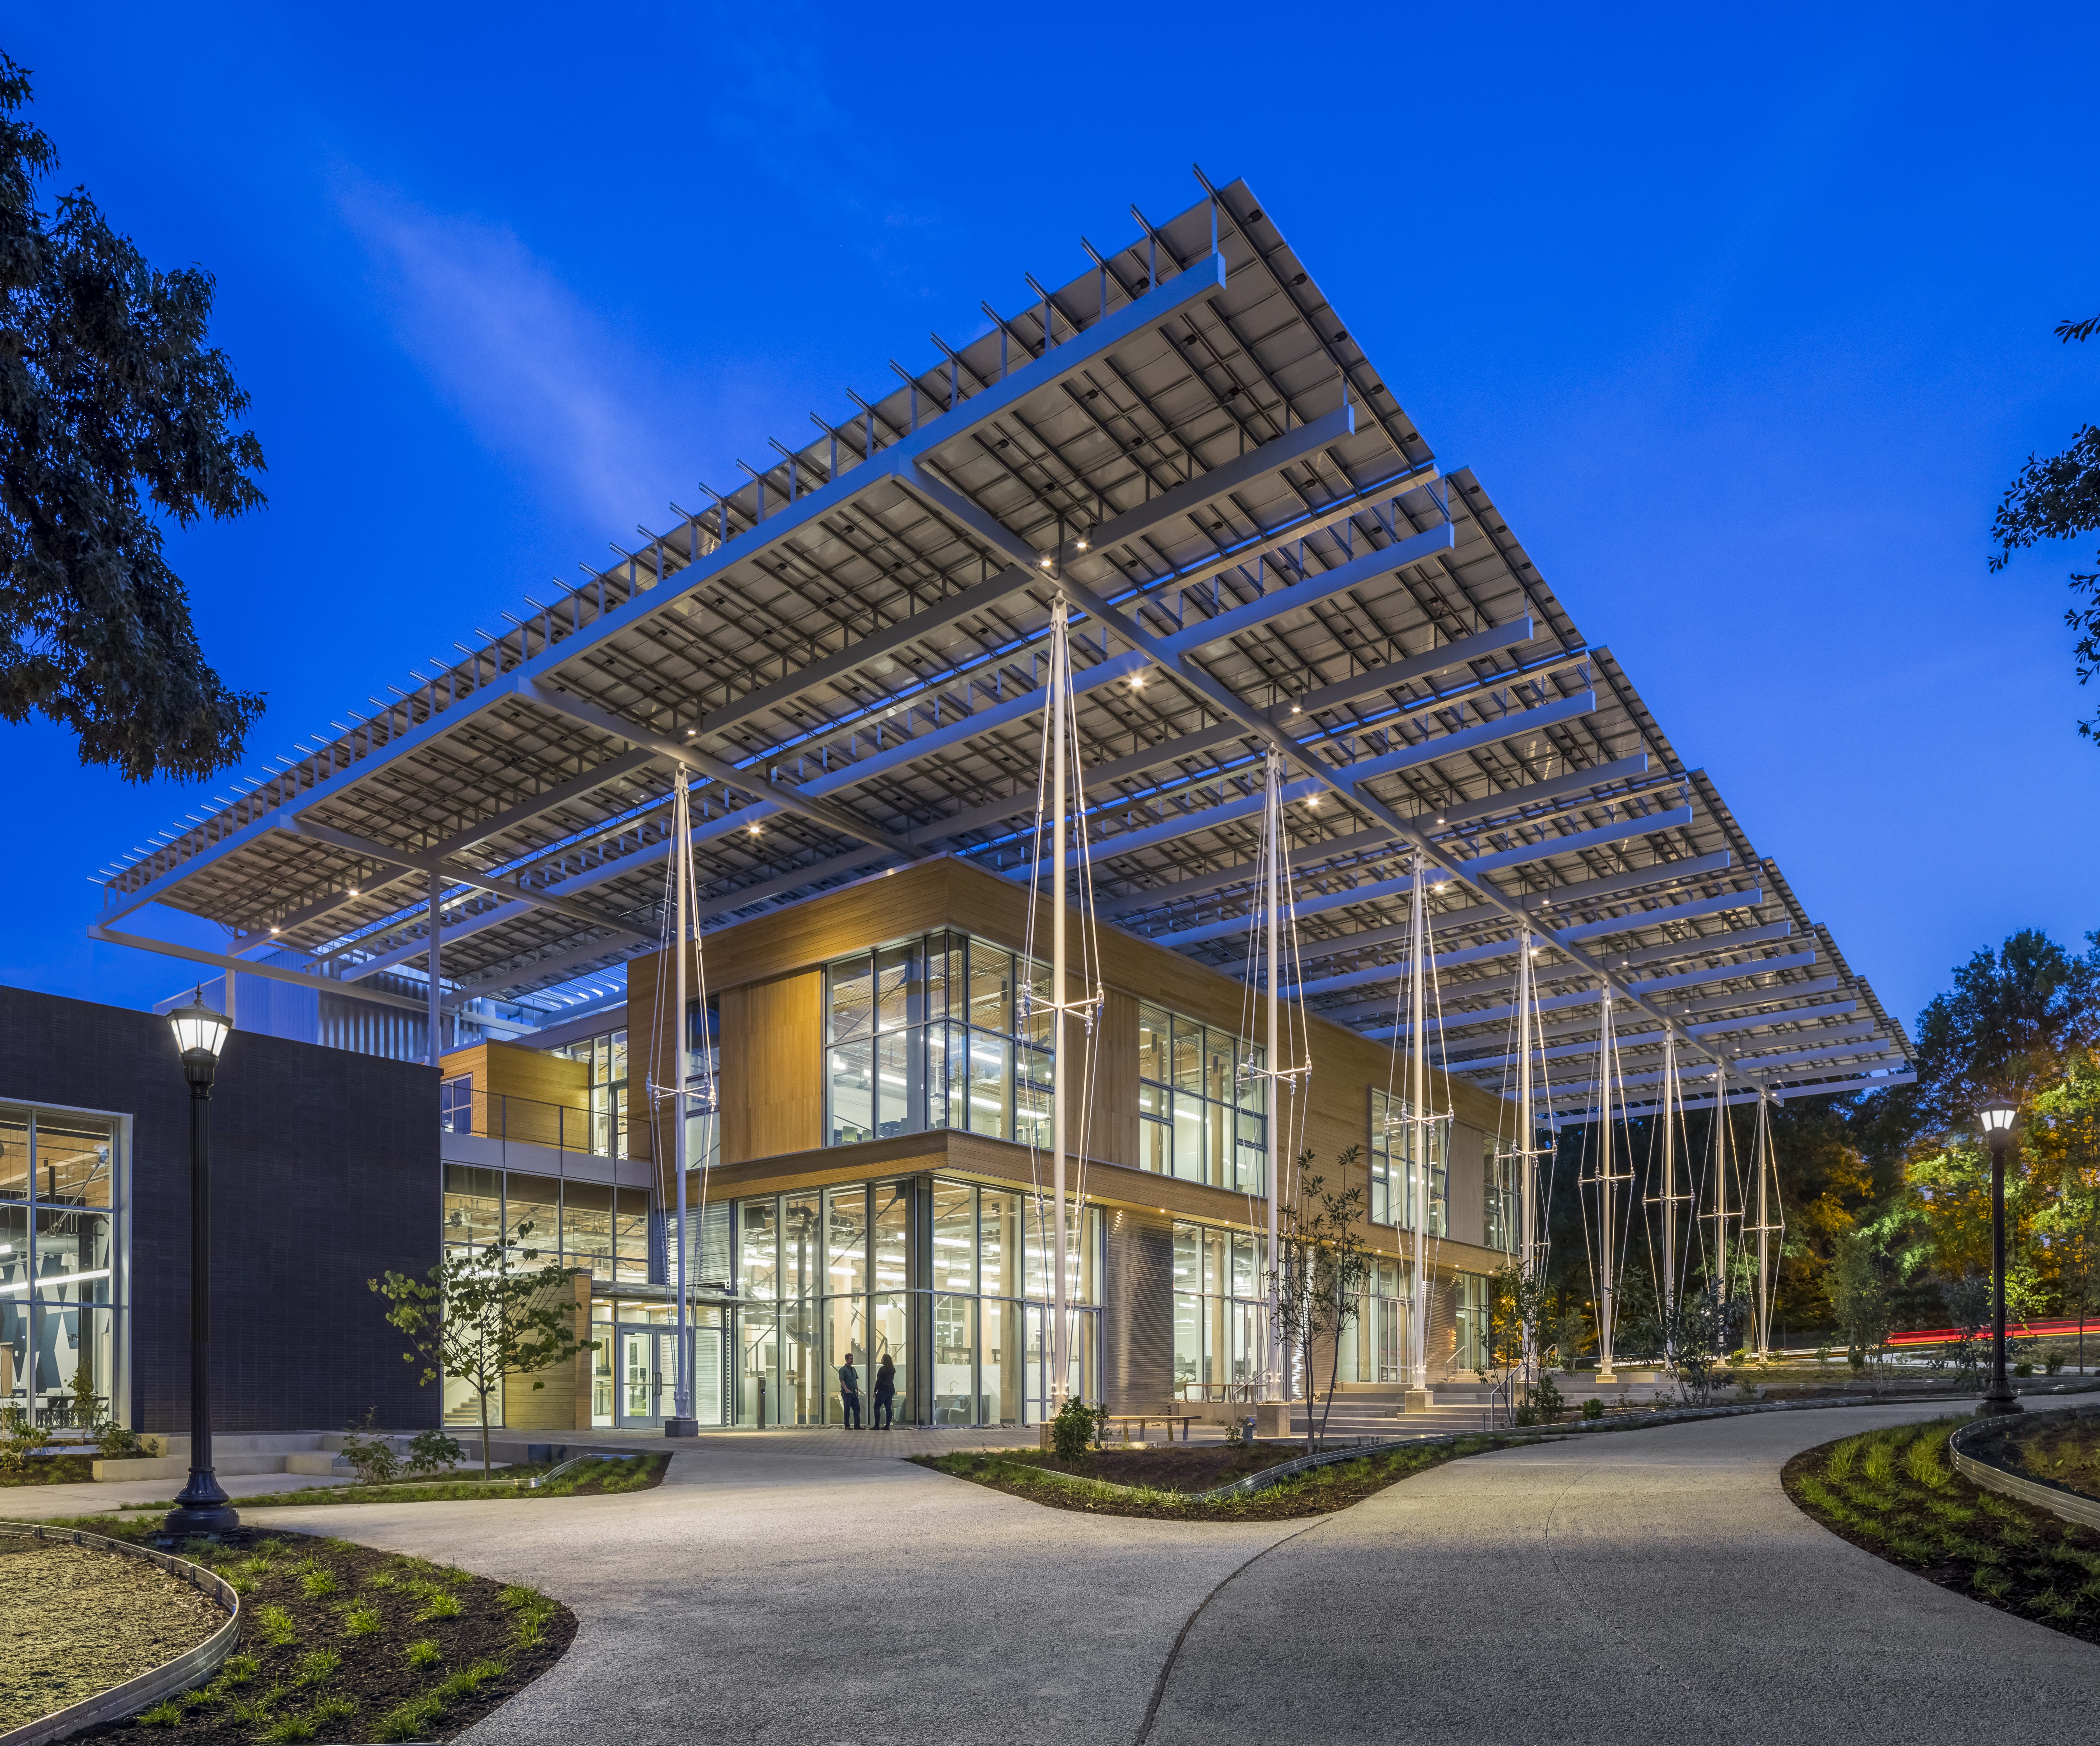 The Kendeda Building's solar canopy creates a front porch for the building. Photo Credit: Jonathan Hillyer.